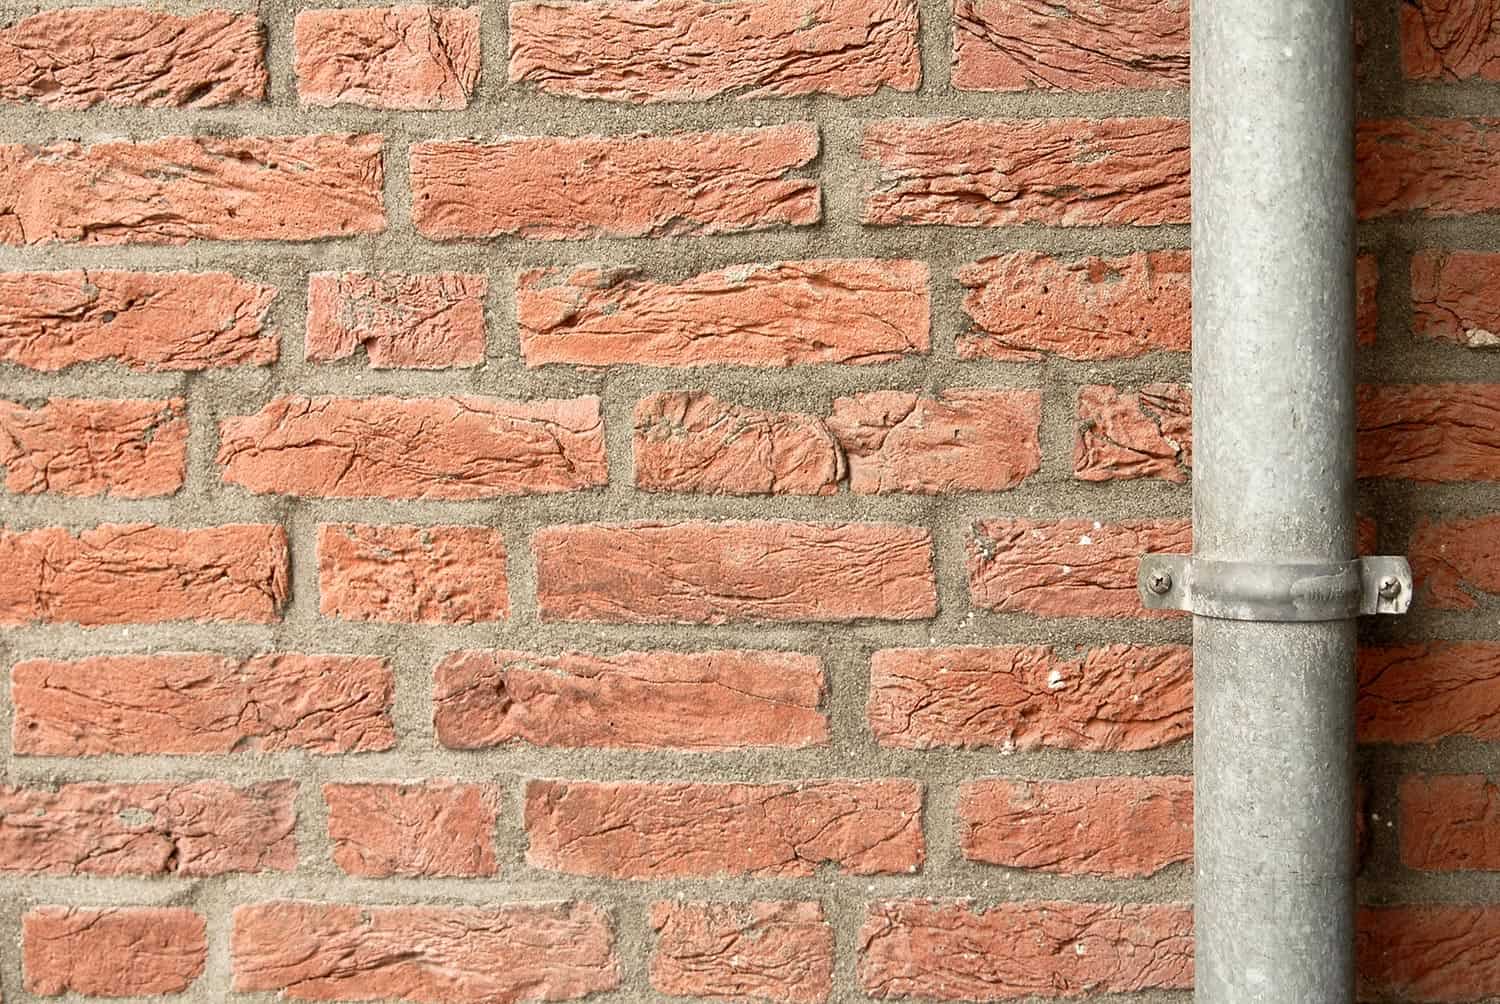 Brick wall and down pipe